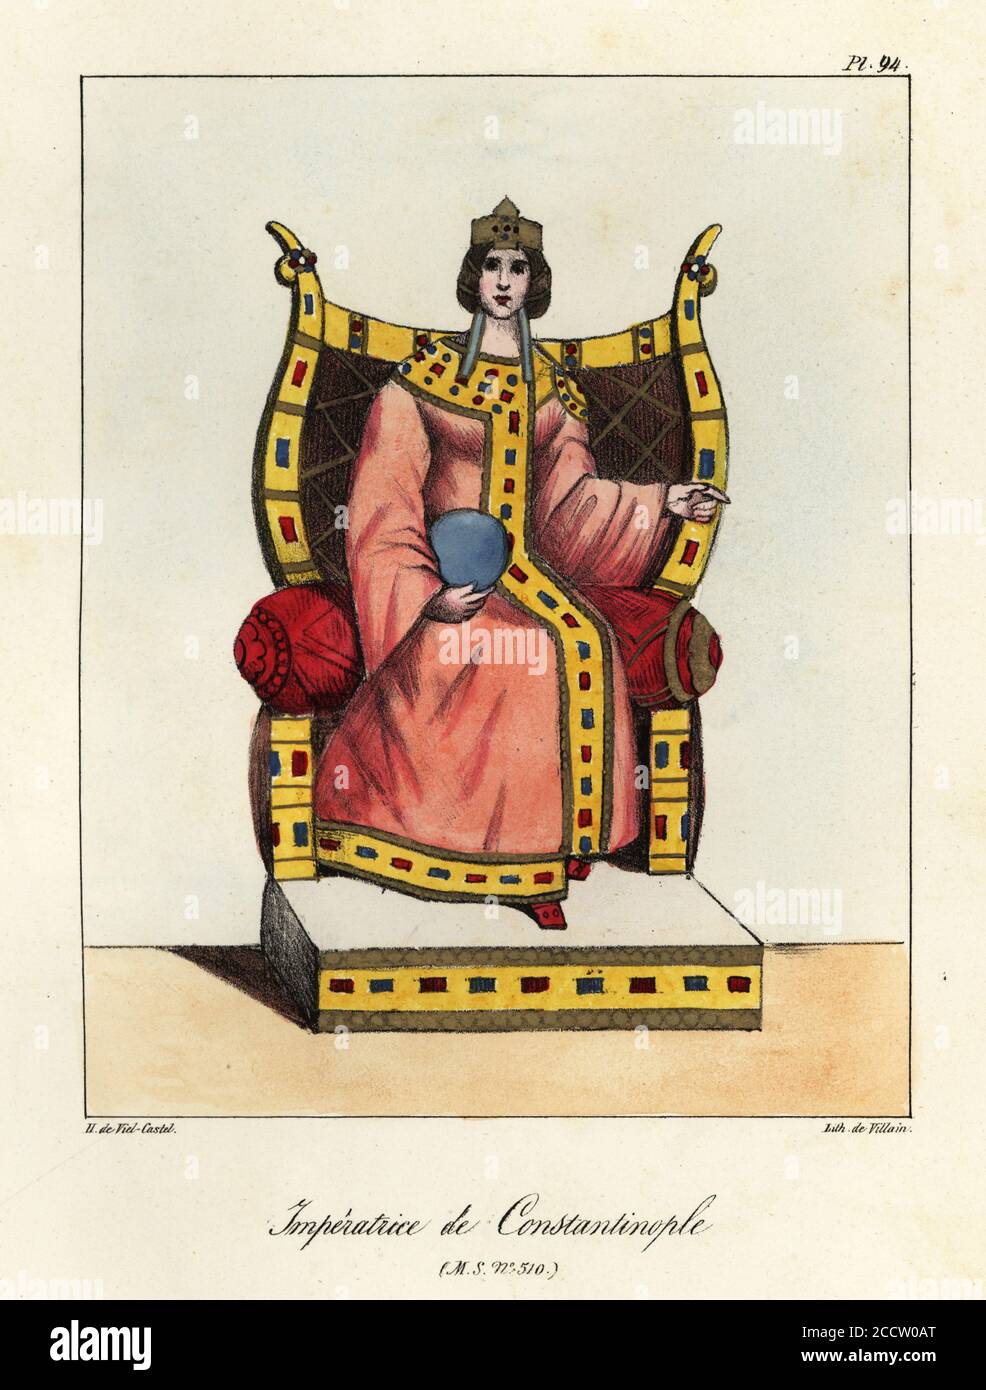 Byzantine Empress, 9th century, in a robe with gilt border encrusted with gems, matching the throne. From an illuminated manuscript by Gregory of Nazianzus. Imperatrice de Constantinople, MS 510. Handcoloured lithograph by Villain after an illustration by Horace de Viel-Castel from his Collection des costumes, armes et meubles pour servir à l'histoire de la France (Collection of costumes, weapons and furniture to be used in the history of France), Treuttel & Wurtz, Bossange, 1827. Stock Photo